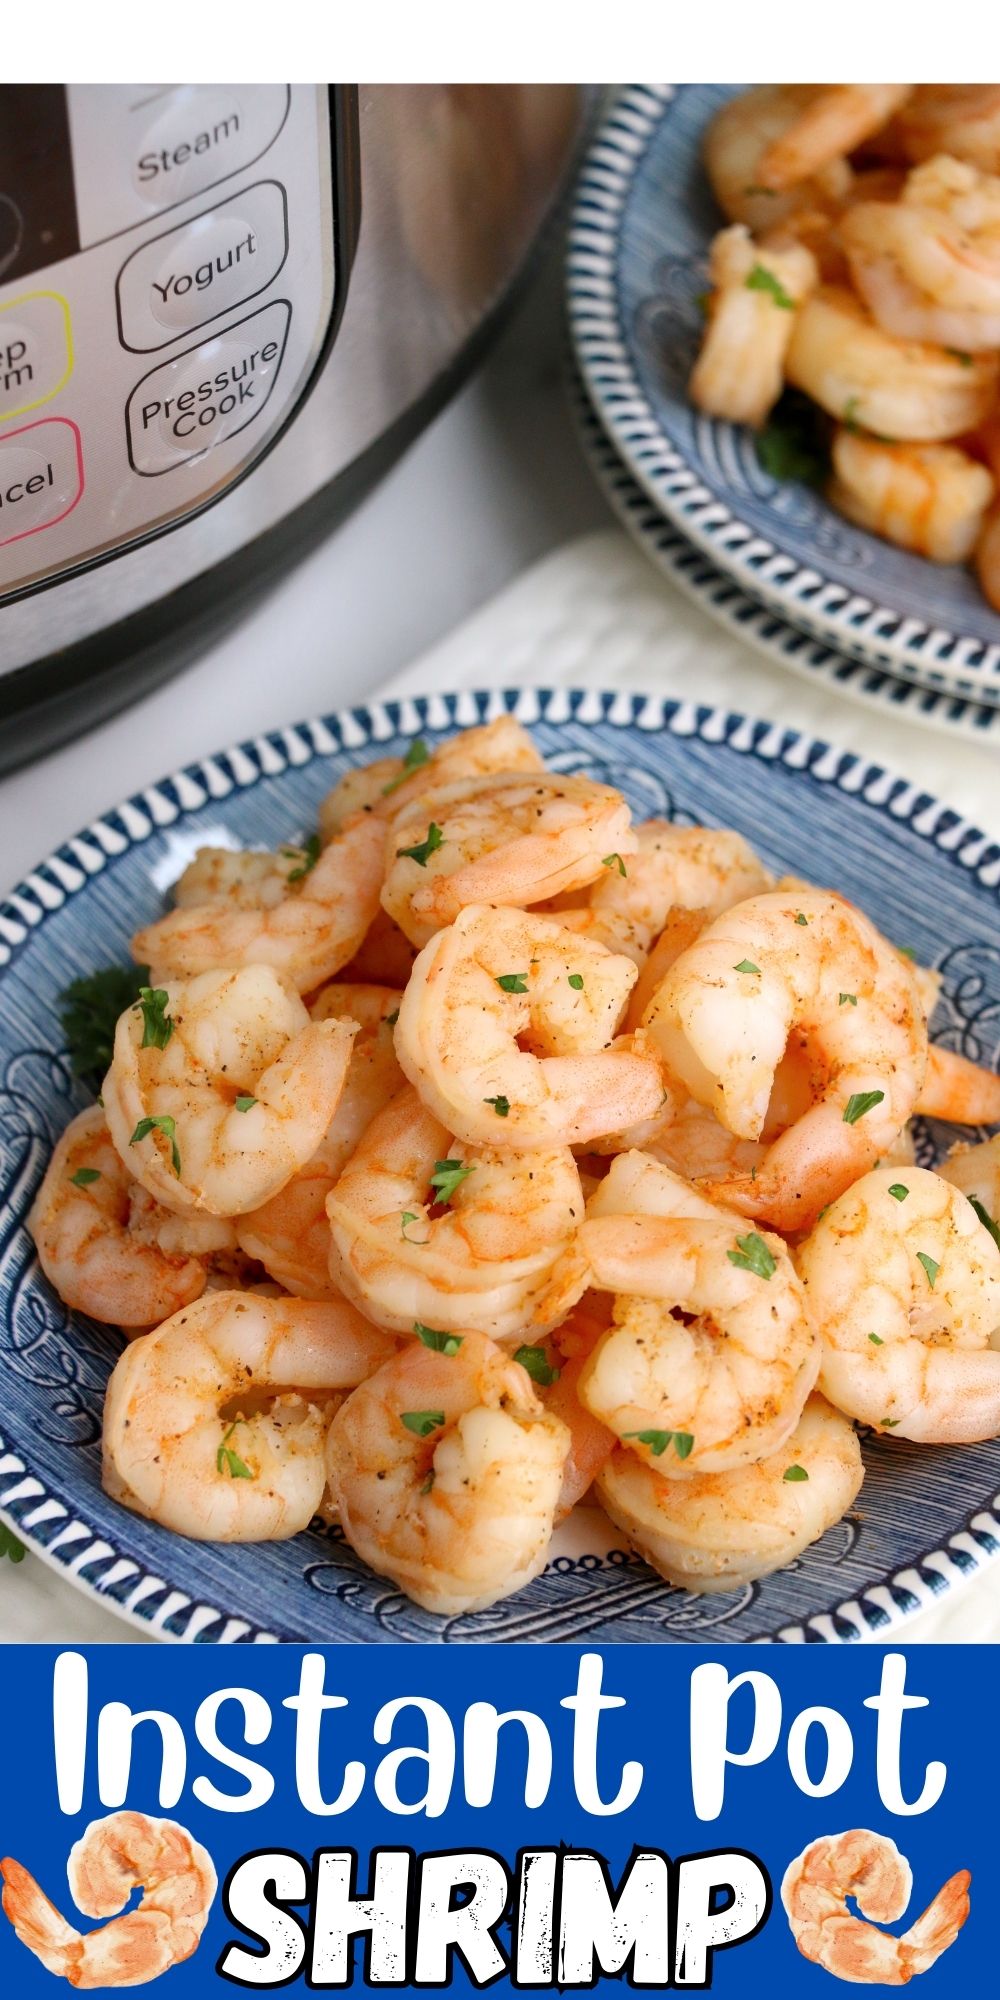 Instant Pot shrimp are so quick and easy! The blend of flavors make for the tastiest shrimp to use in any meal.